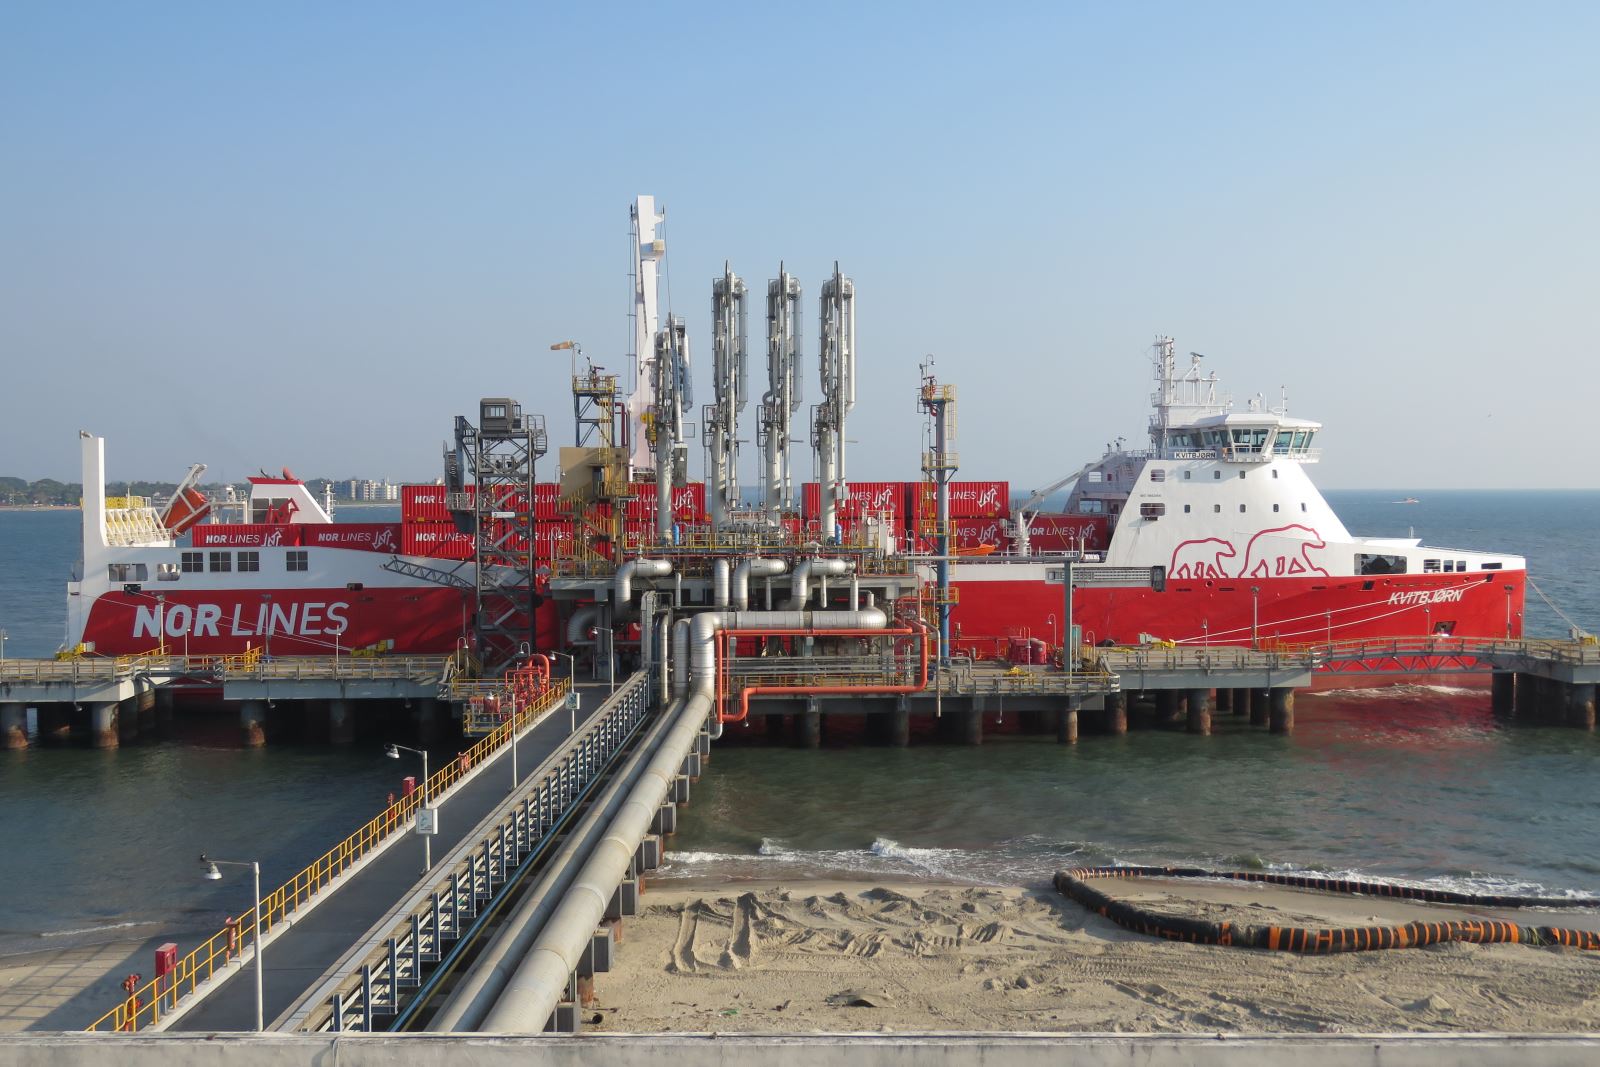 BPCL Pioneers LNG bunkering in India